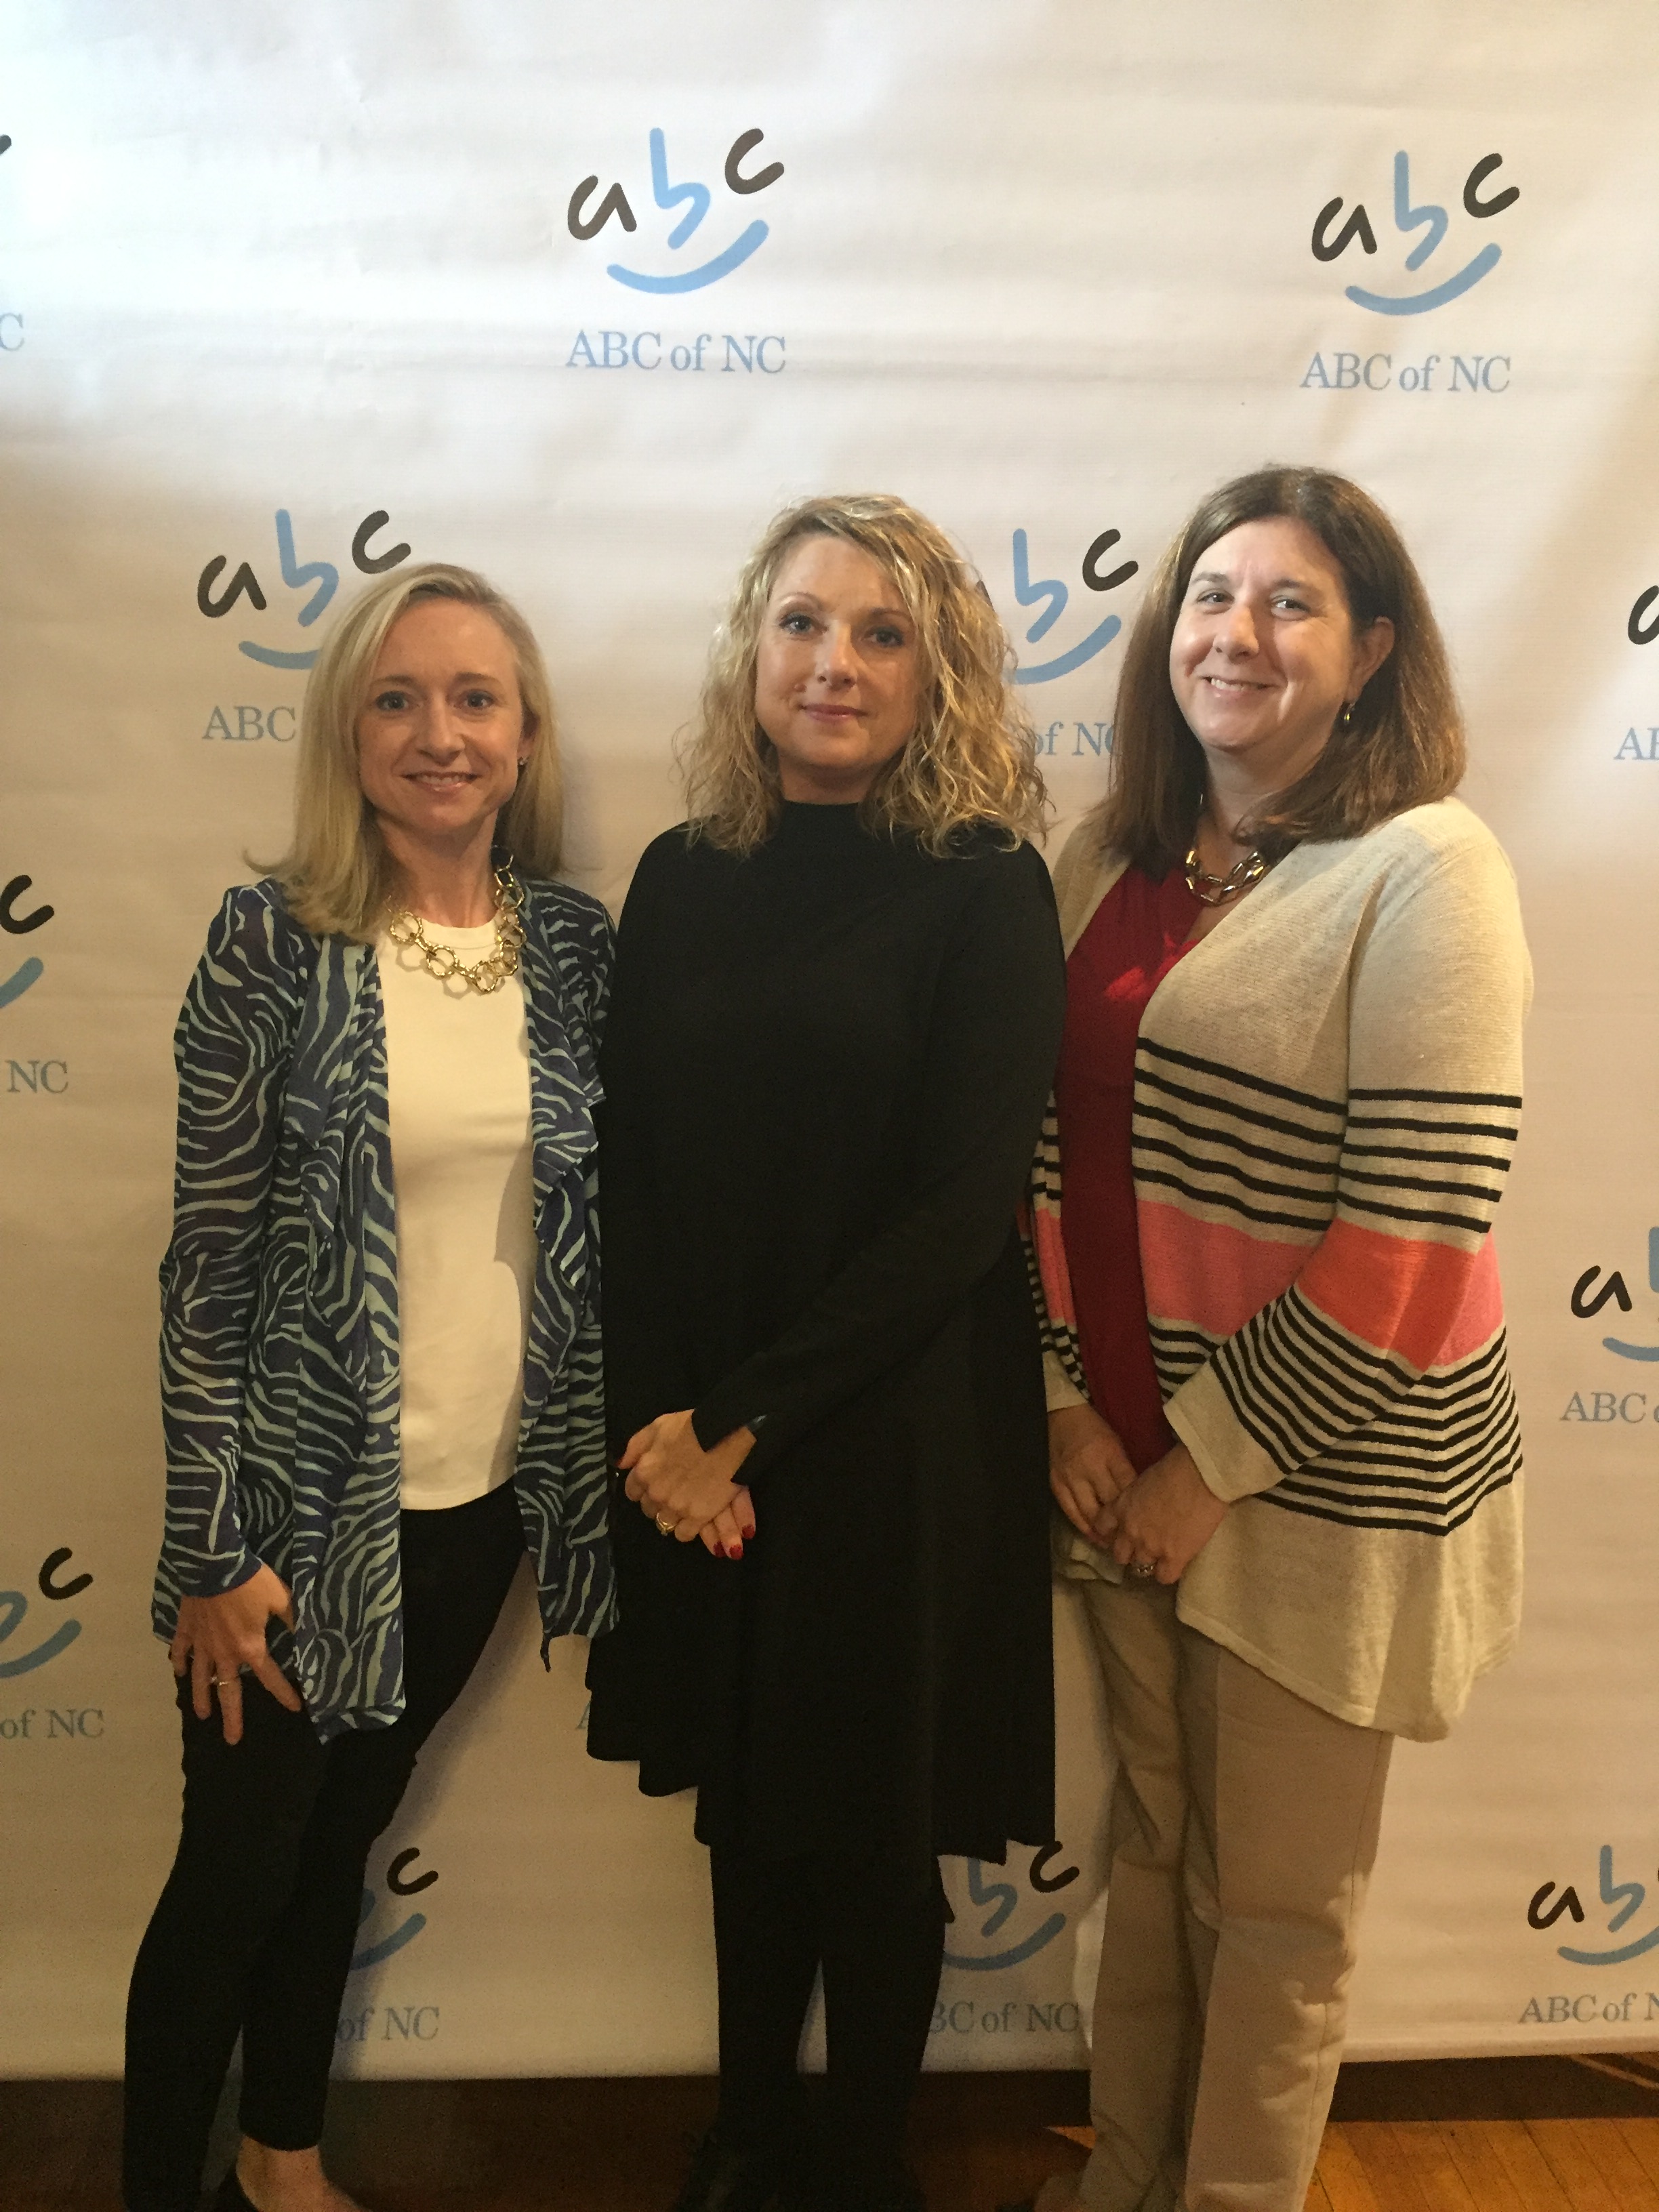 Affordable Housing Attorneys Attend the ABC of NC Gourmet Lunchbox Lunch